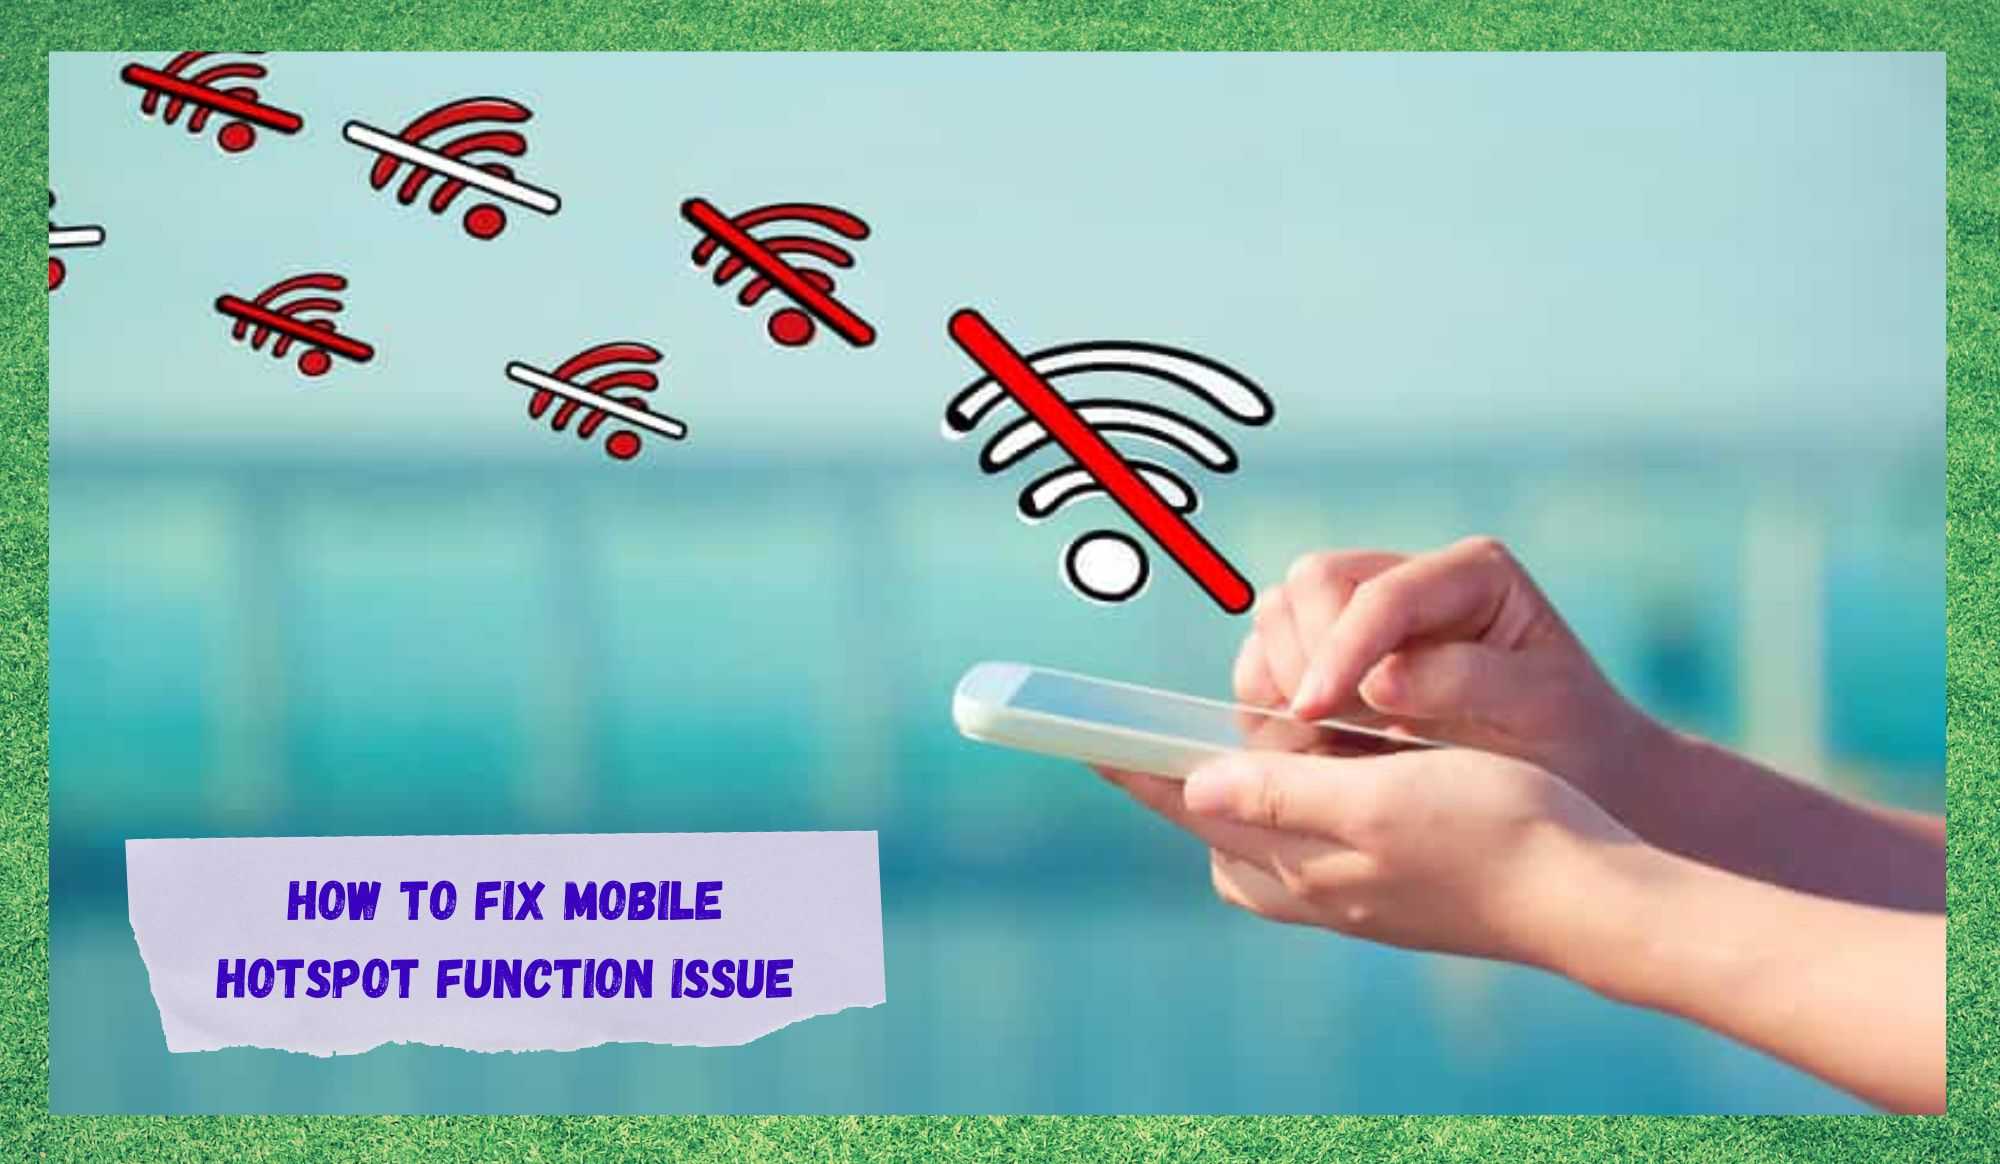 there is a temporary network problem that prevents the enablement of the mobile hotspot function